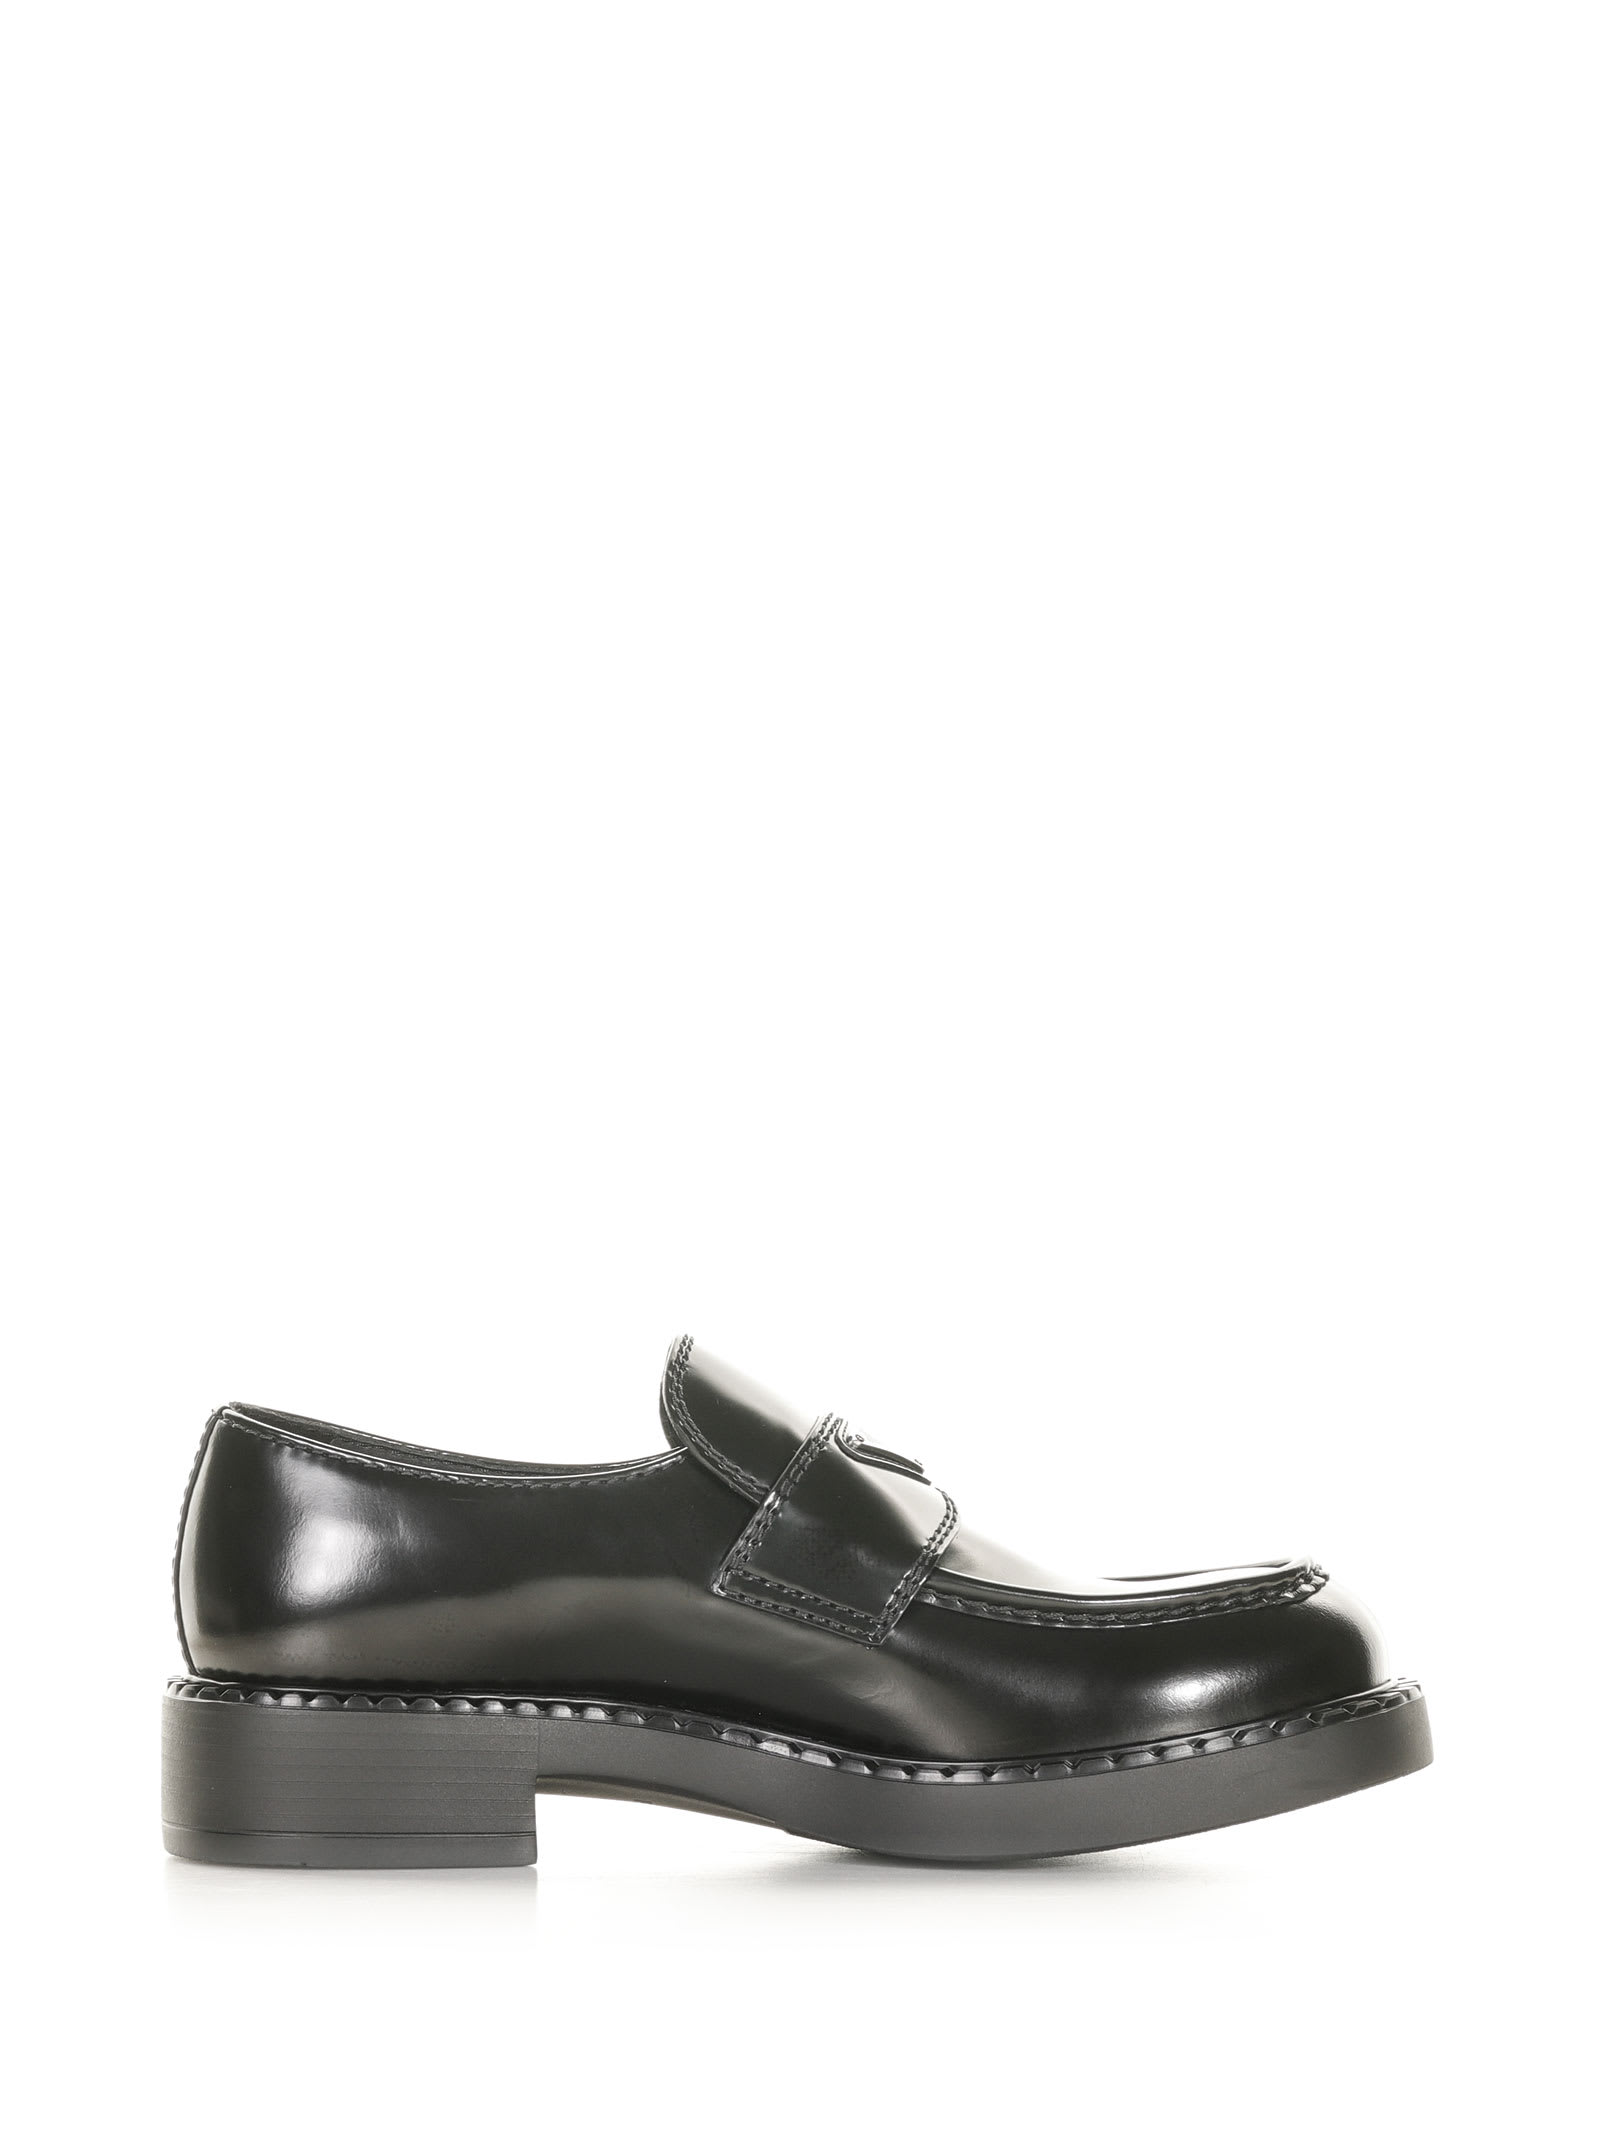 PRADA CHOCOLATE LOAFERS IN BRUSHED LEATHER